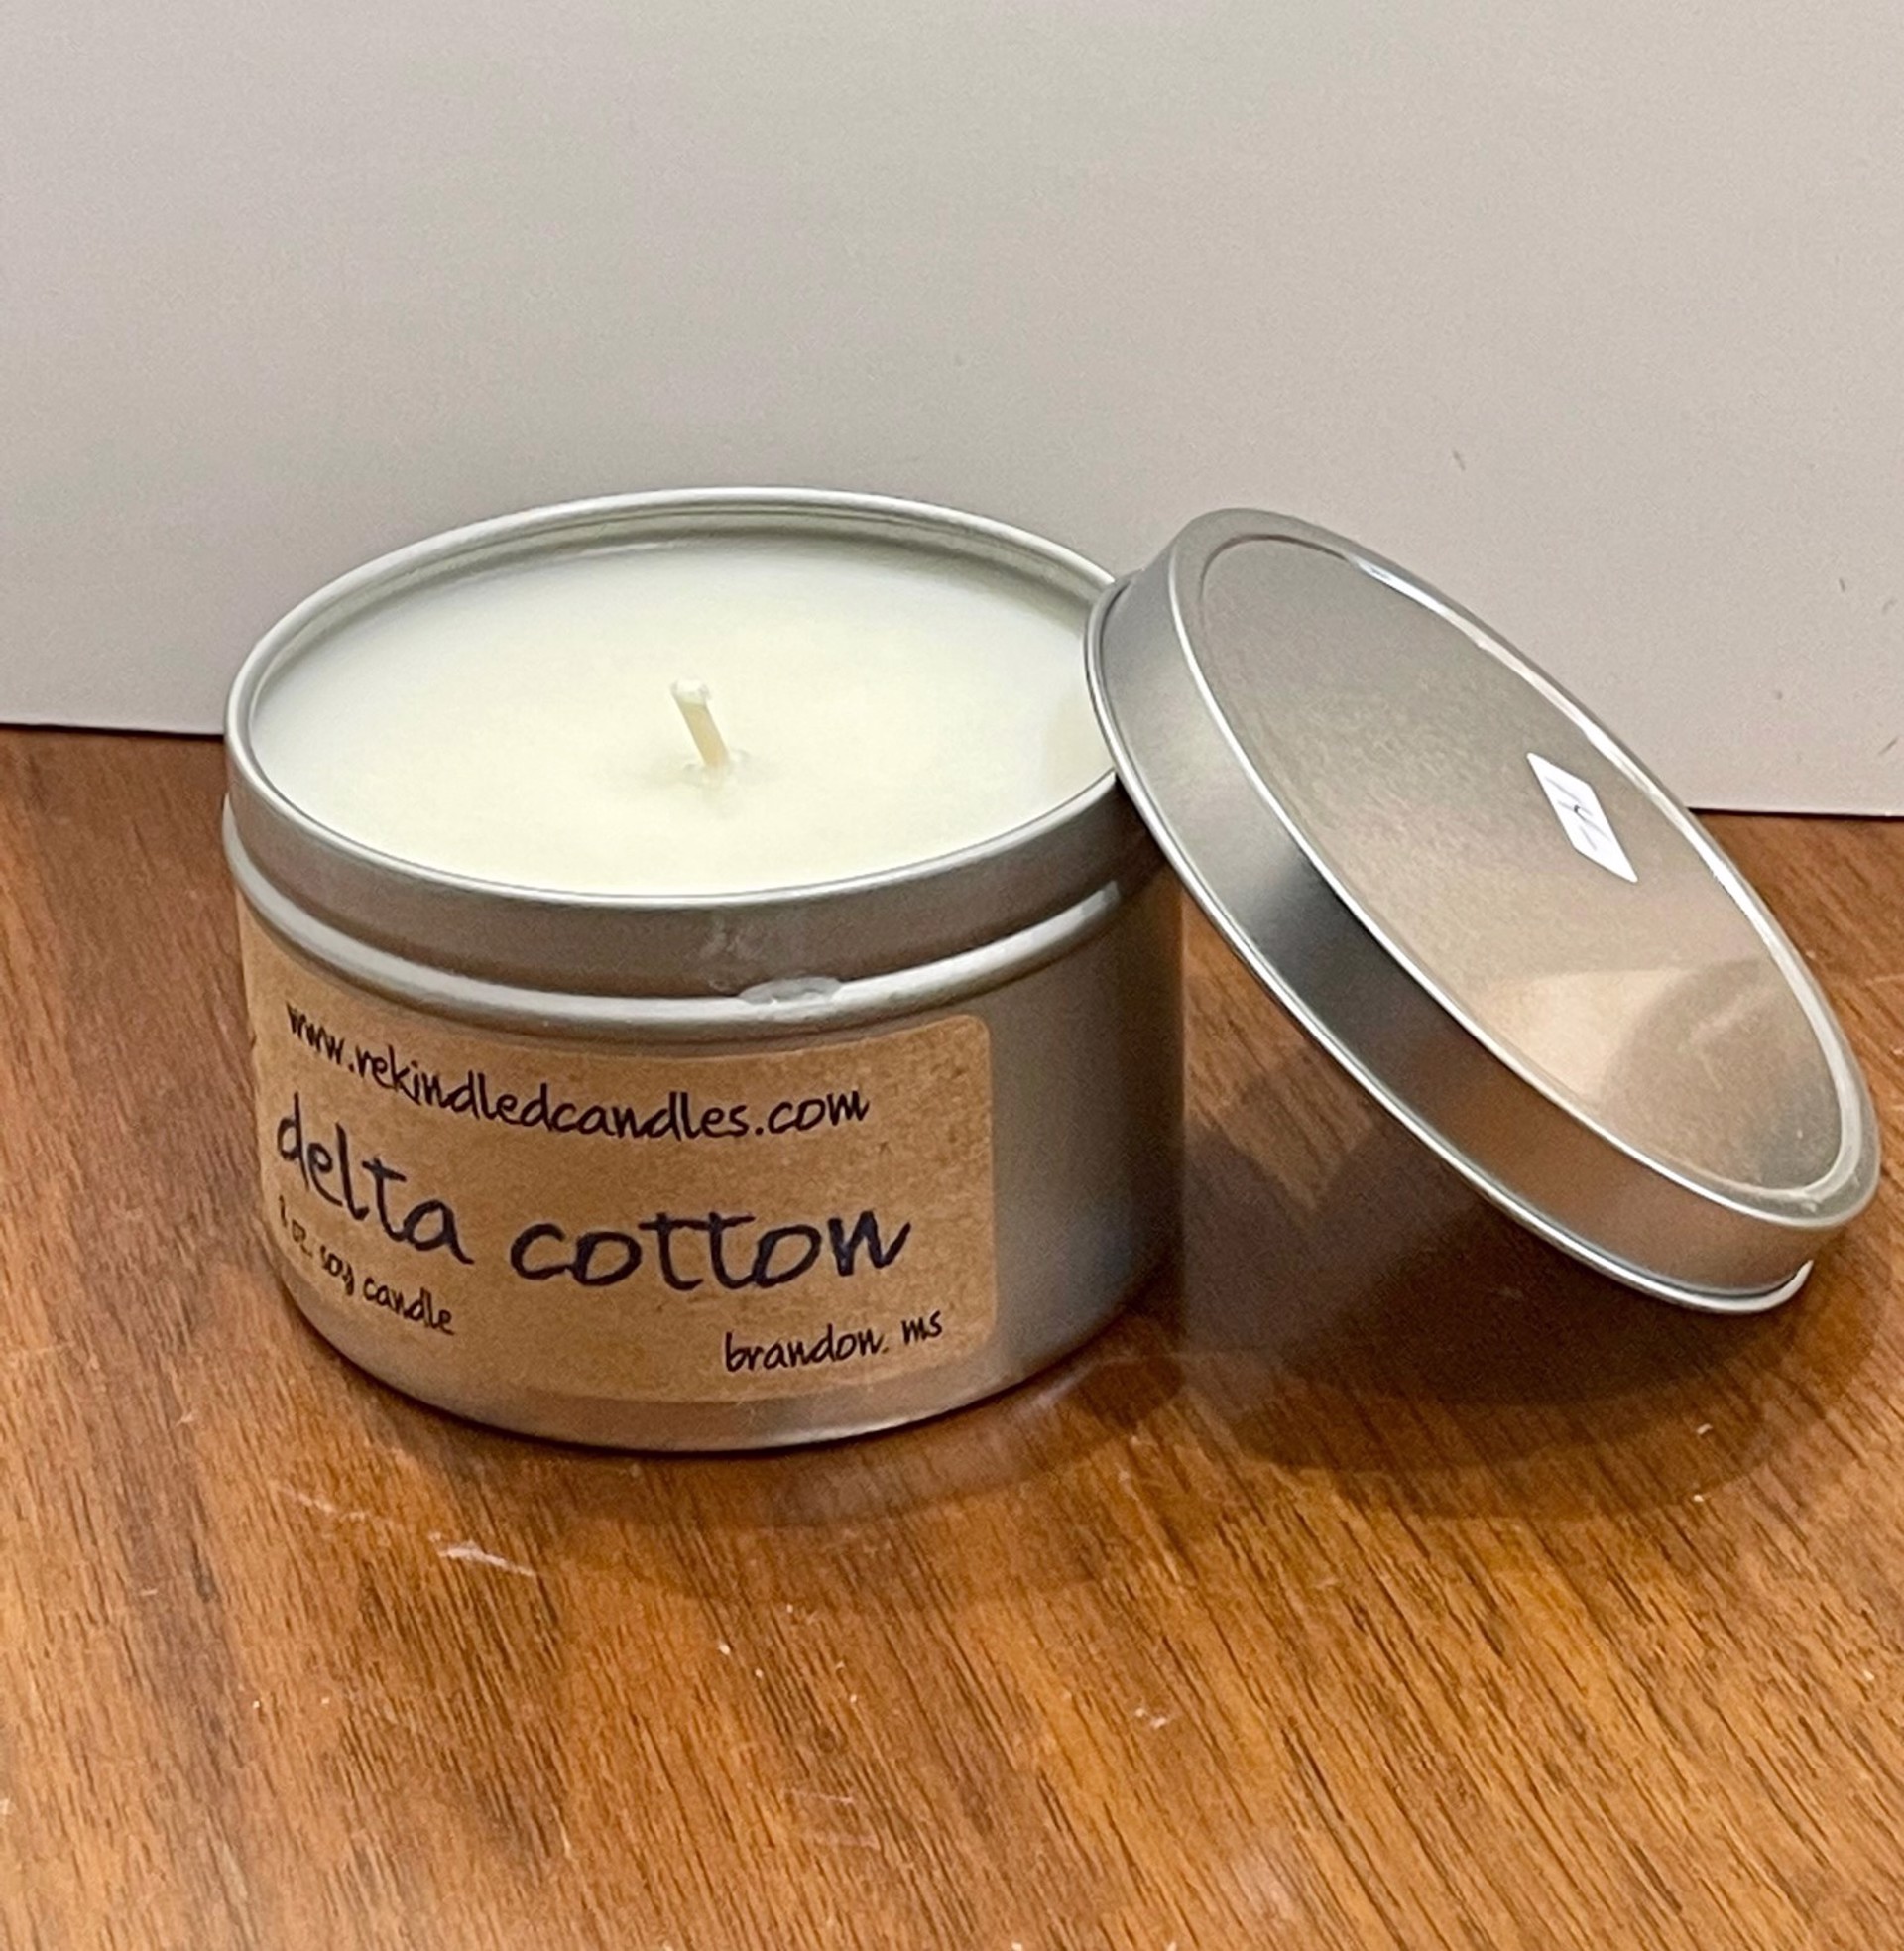 Delta Cotton Candle Tin by re-kindled candle company